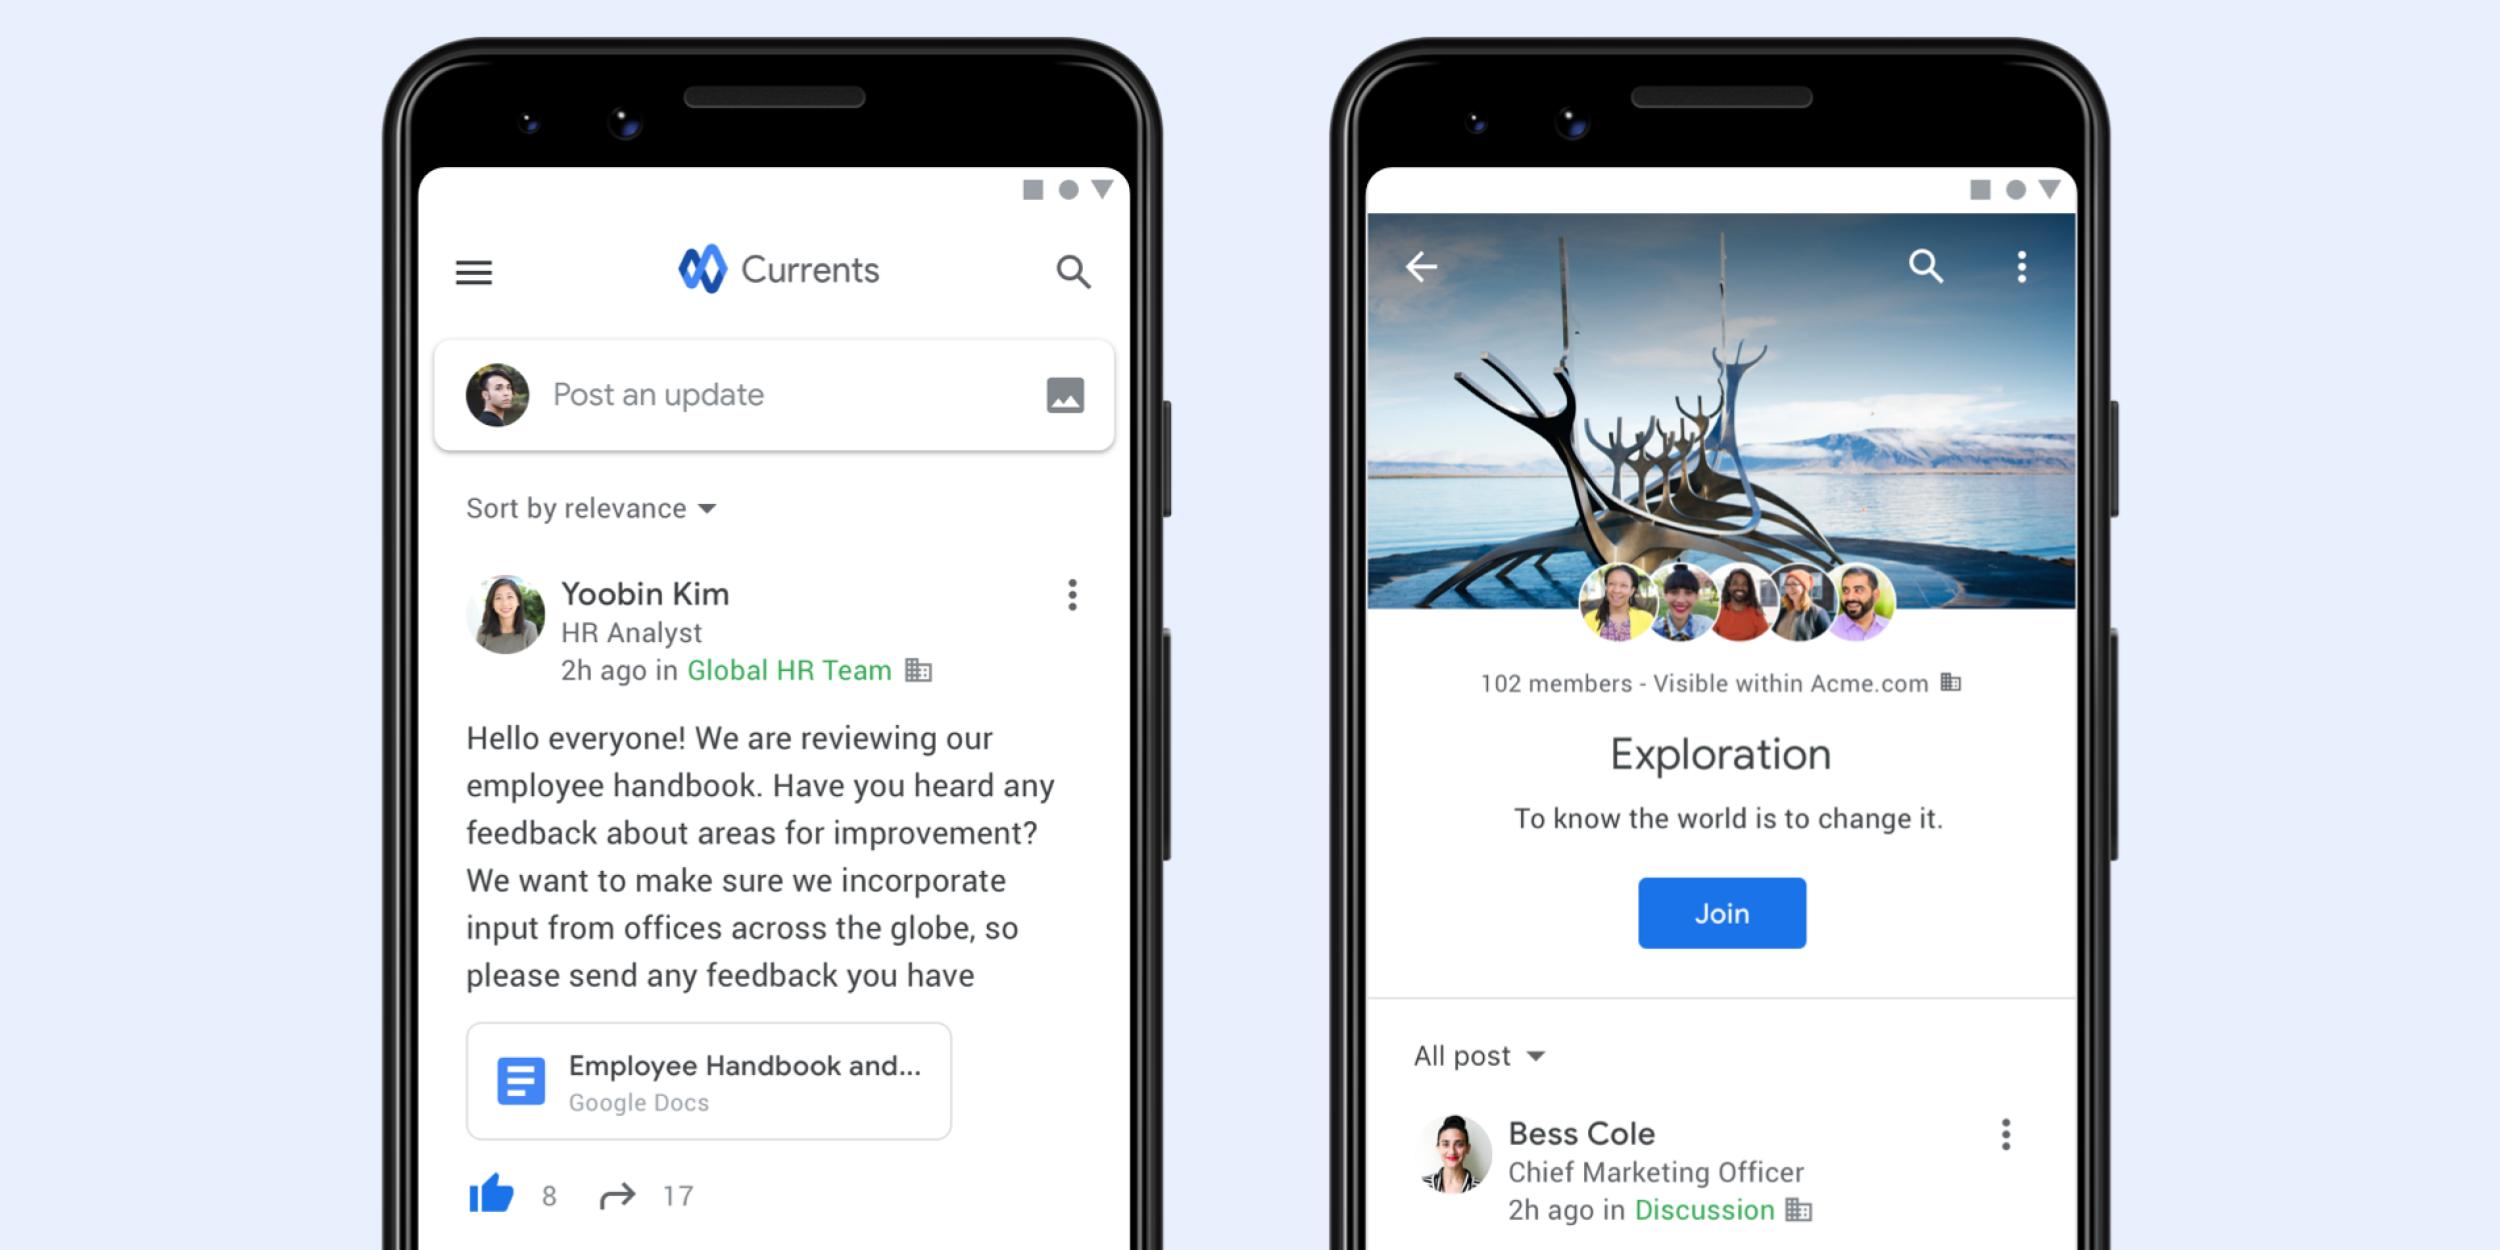 New community features for Google Chat and an update on Currents